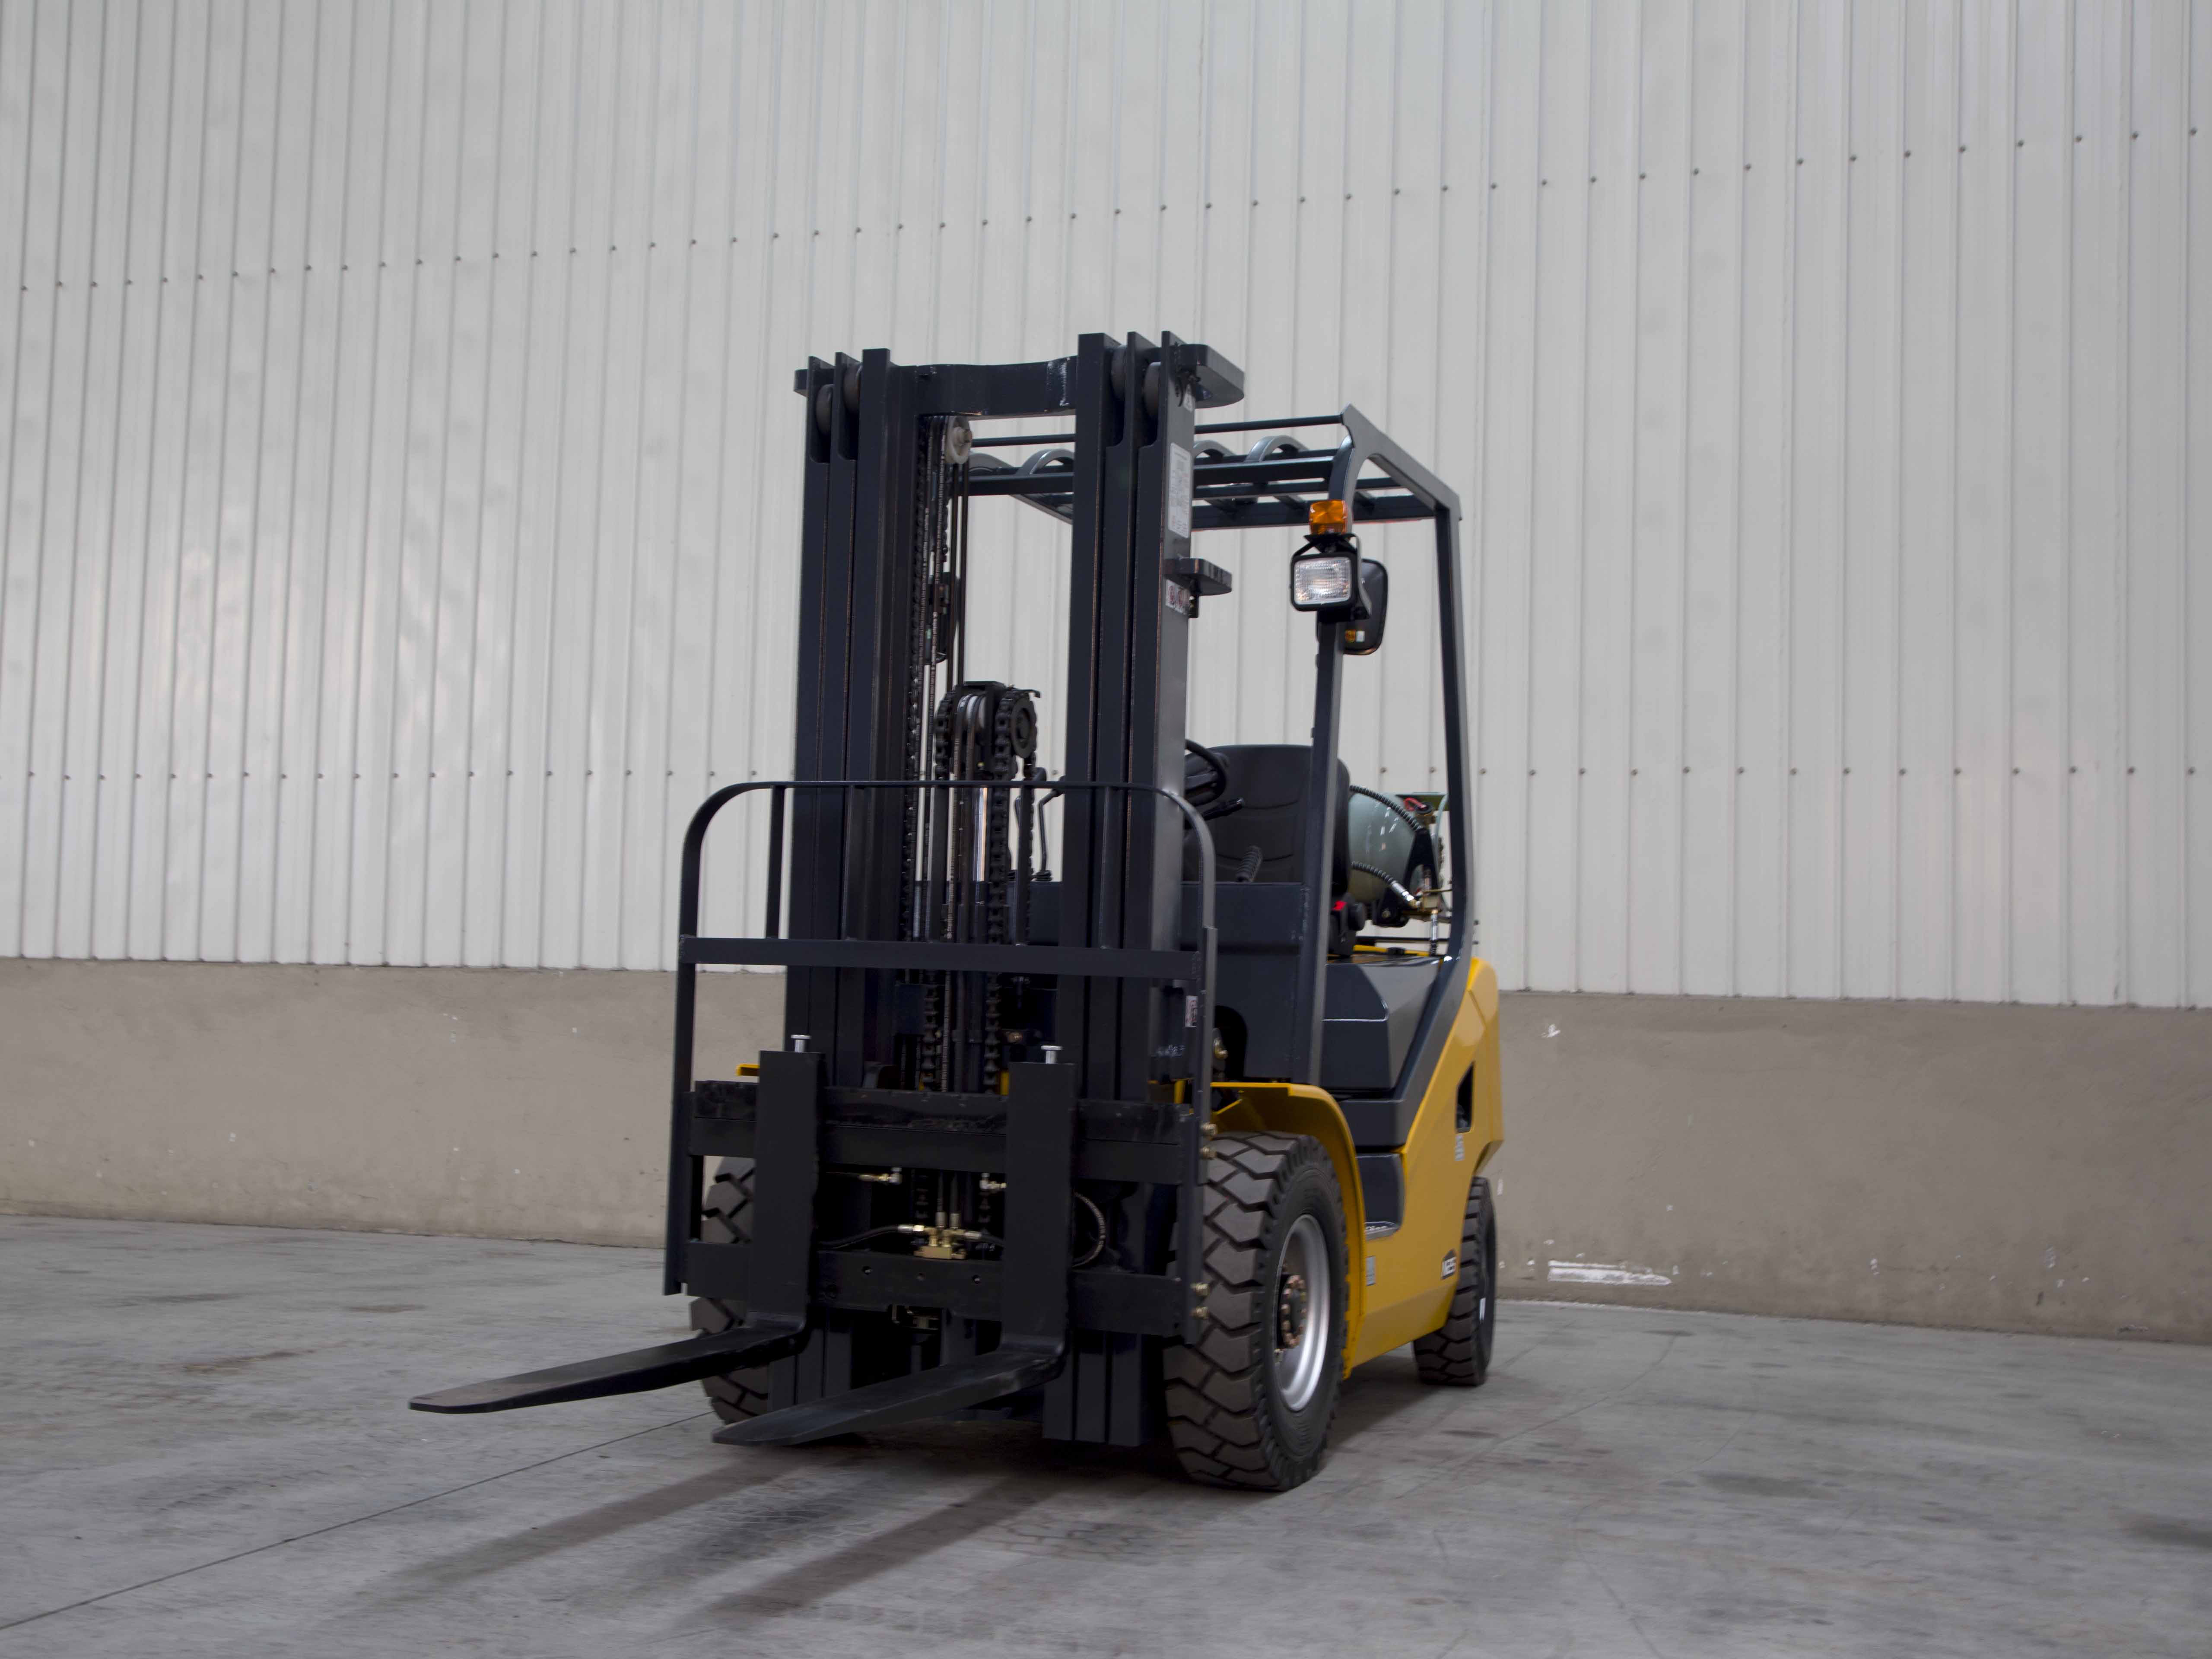 Top brand of China Manufacture Japanese Engine XCB-D35 Diesel Forklift 3.5T Truck Lift Stacker Price manufacture